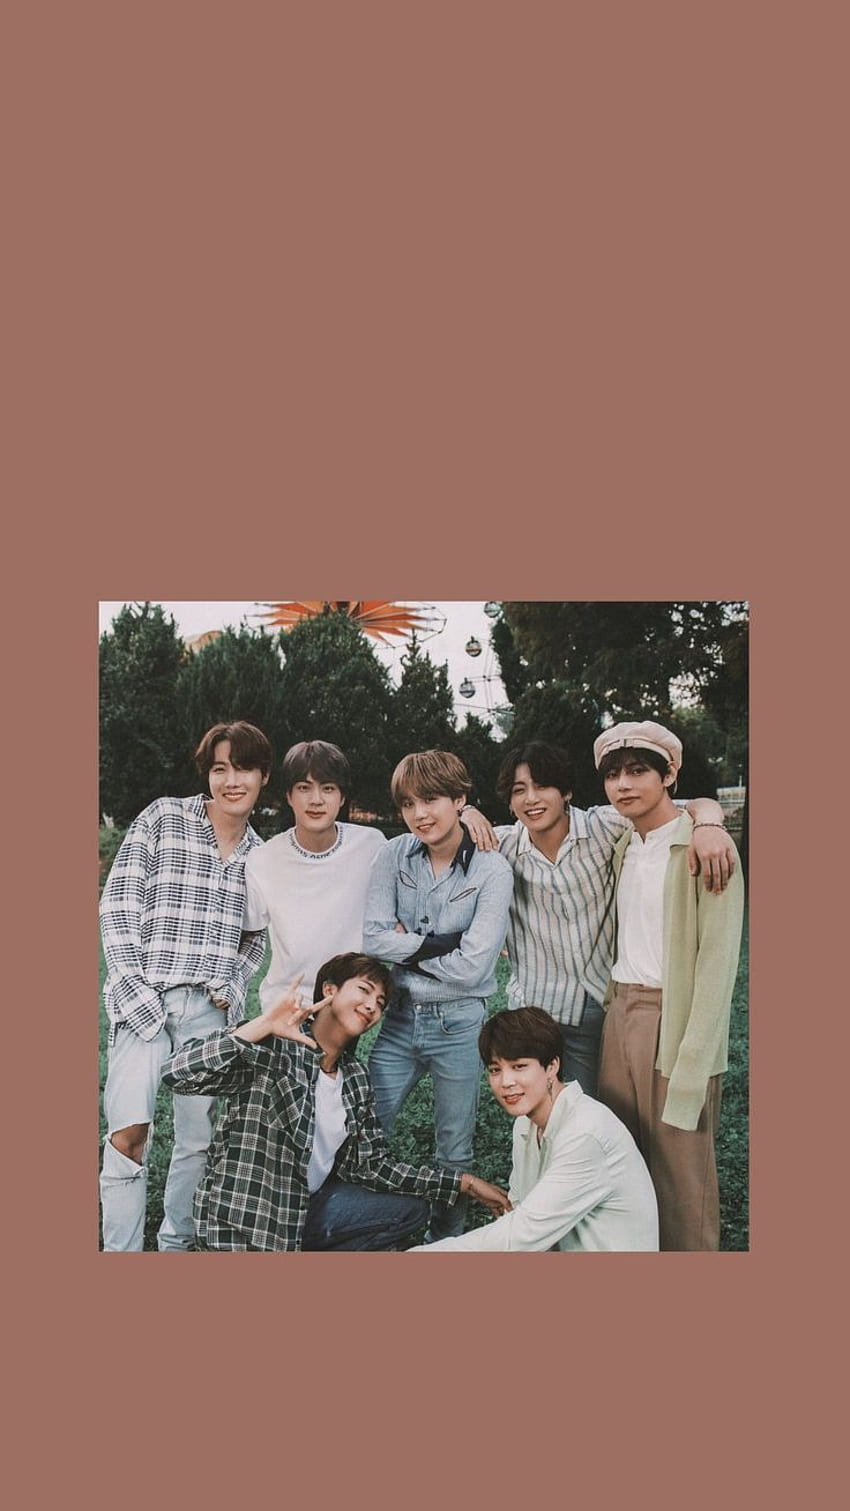 All your favorite BTS songs at Iomoio. Bts aesthetic, Bts, Bts aesthetic for phone, Cool BTS Aesthetic HD phone wallpaper